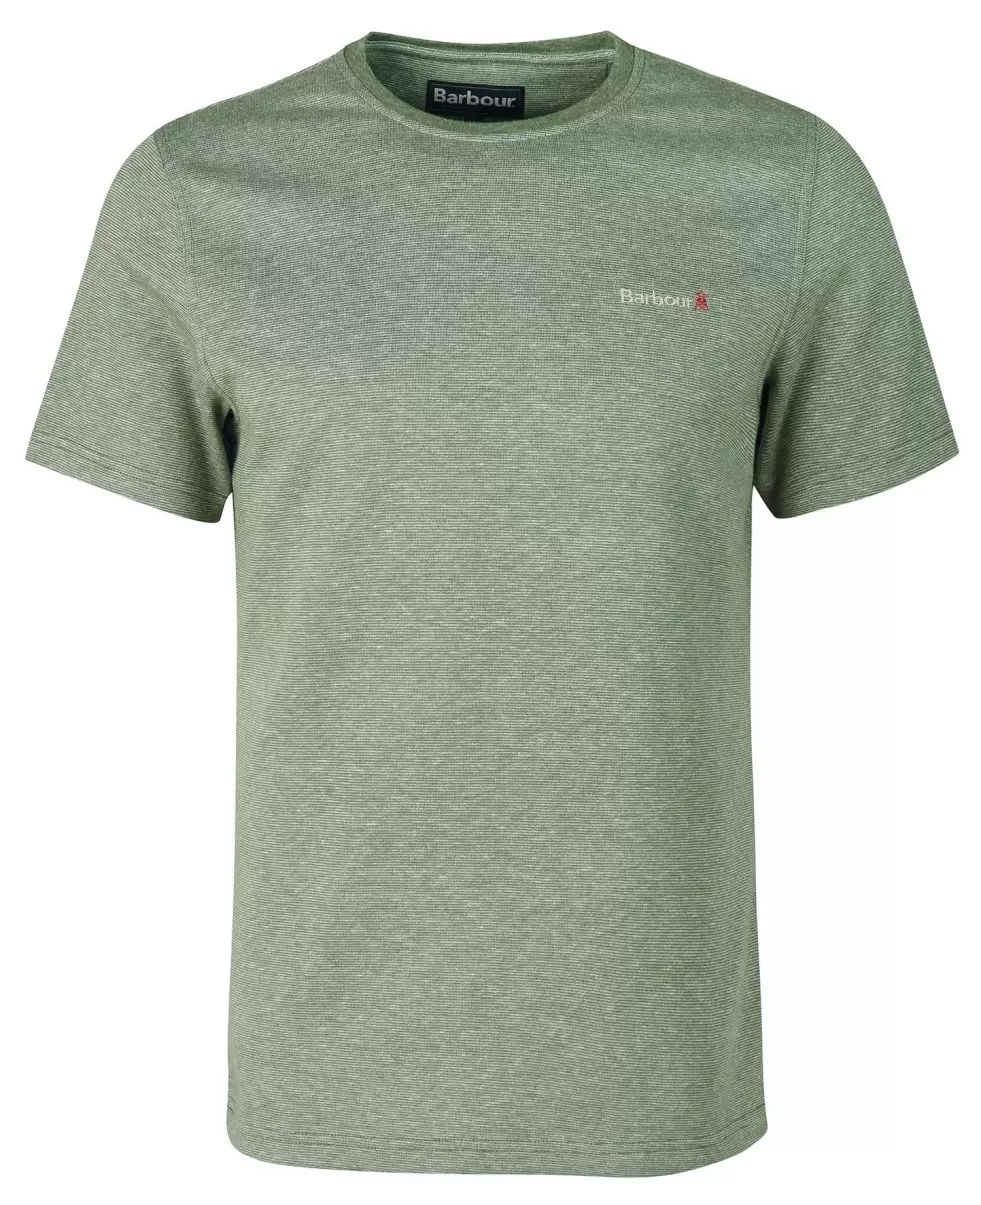 Men Wholesome Barbour Pluckley T-Shirt Burnt Olive T-Shirts - 1